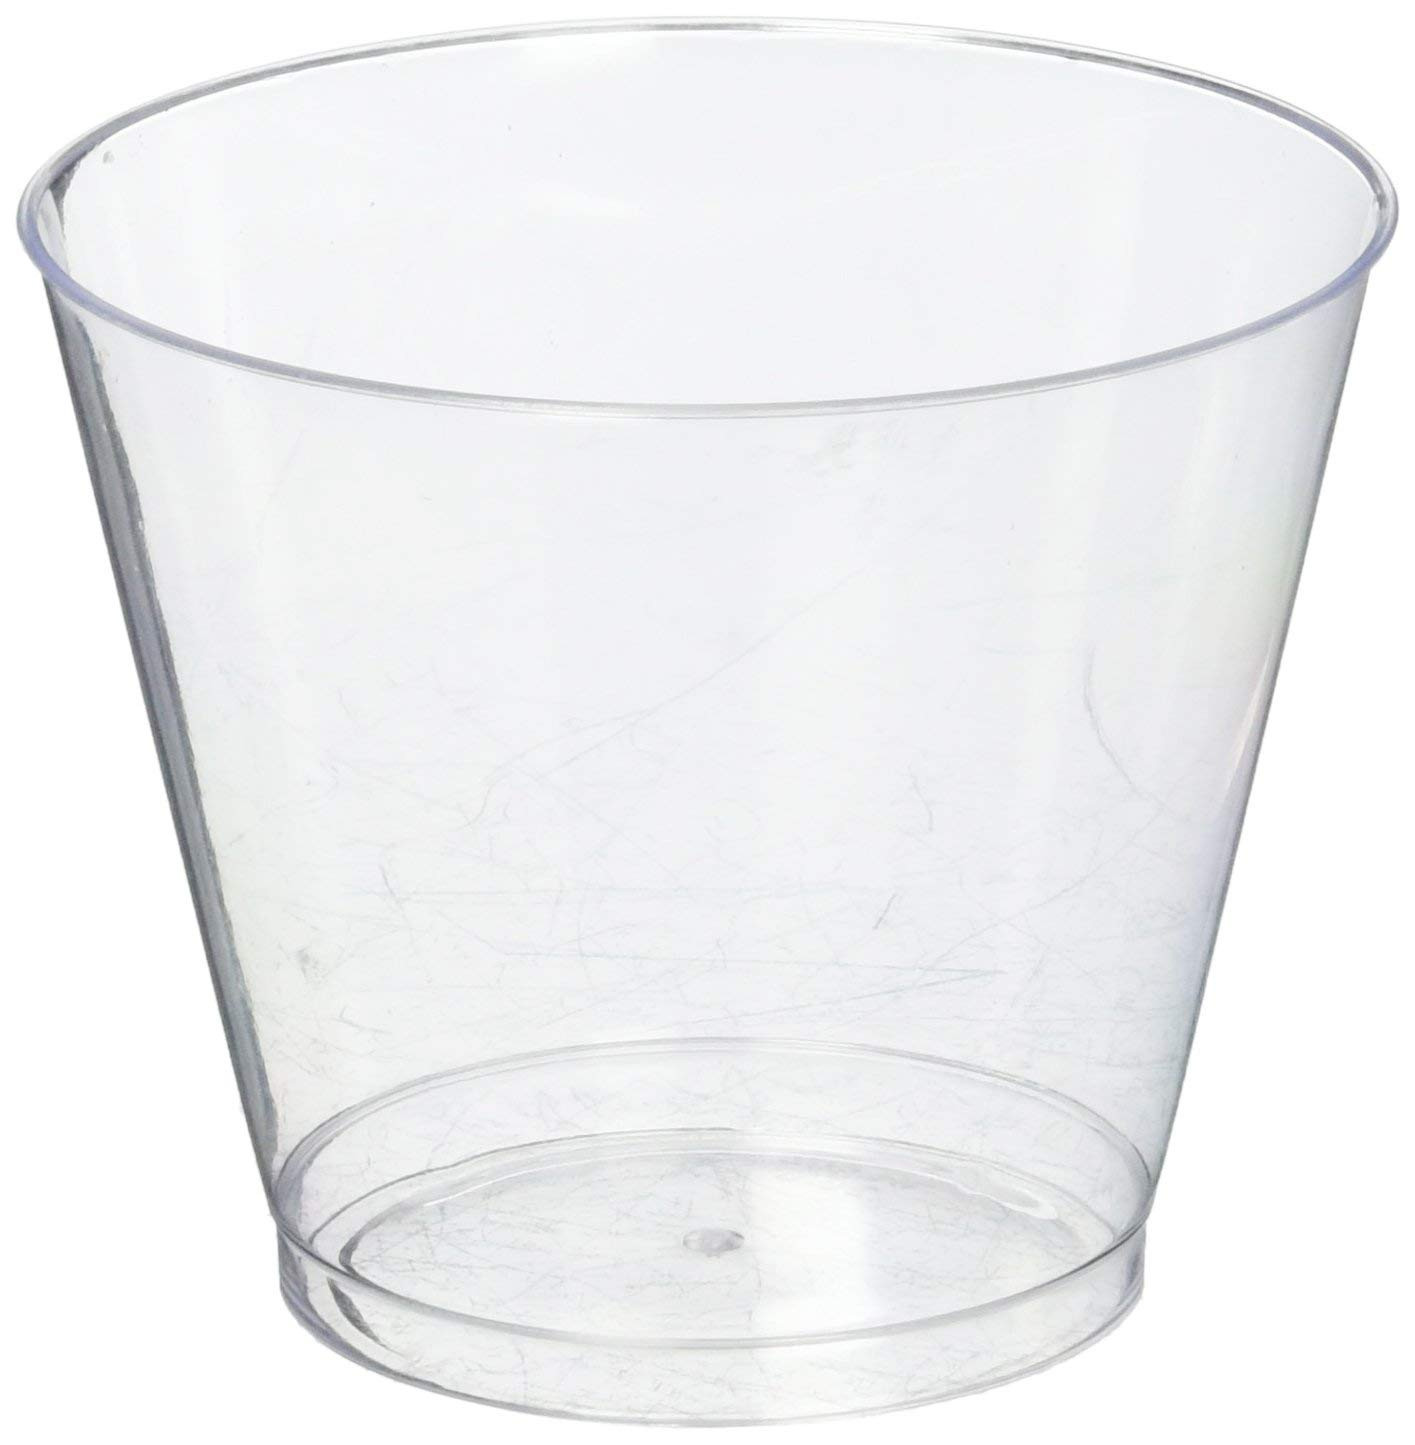 15 Trendy 10.5 Glass Cylinder Vase 2024 free download 10 5 glass cylinder vase of amazon com hard plastic tumblers 9 oz party cups old fashioned with amazon com hard plastic tumblers 9 oz party cups old fashioned glass 100 count drinking glasse